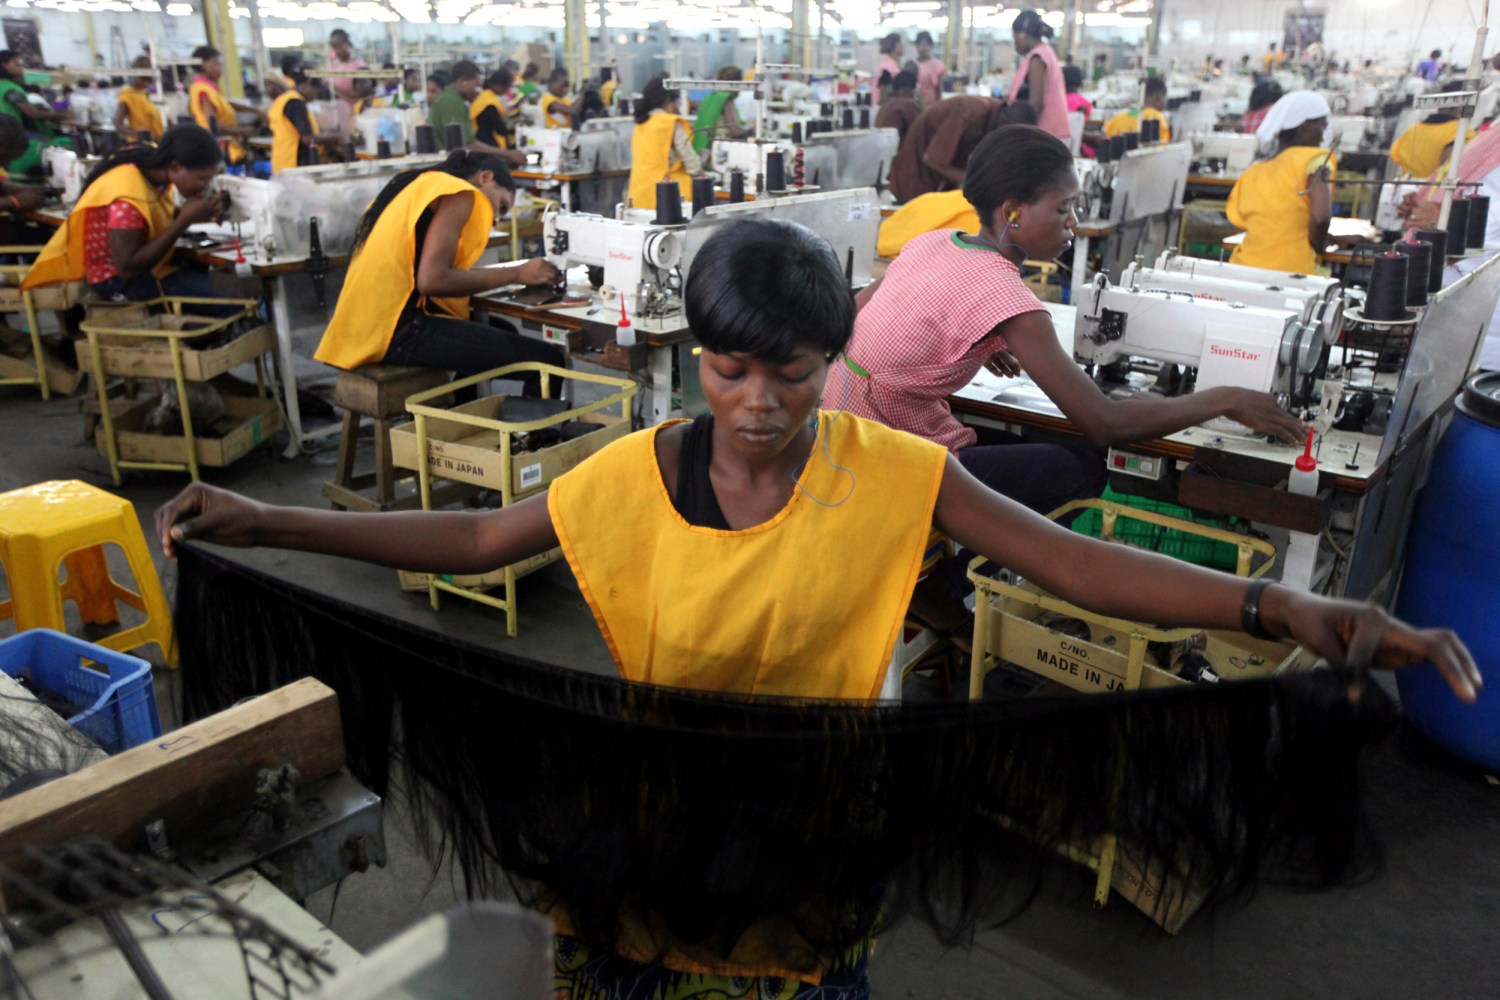 Women work in Amingos fibre hair factory in Ikeja district in Lagos, December 1, 2011. REUTERS/Akintunde Akinleye(NIGERIA - Tags: SOCIETY BUSINESS) - GM1E7C203TF01